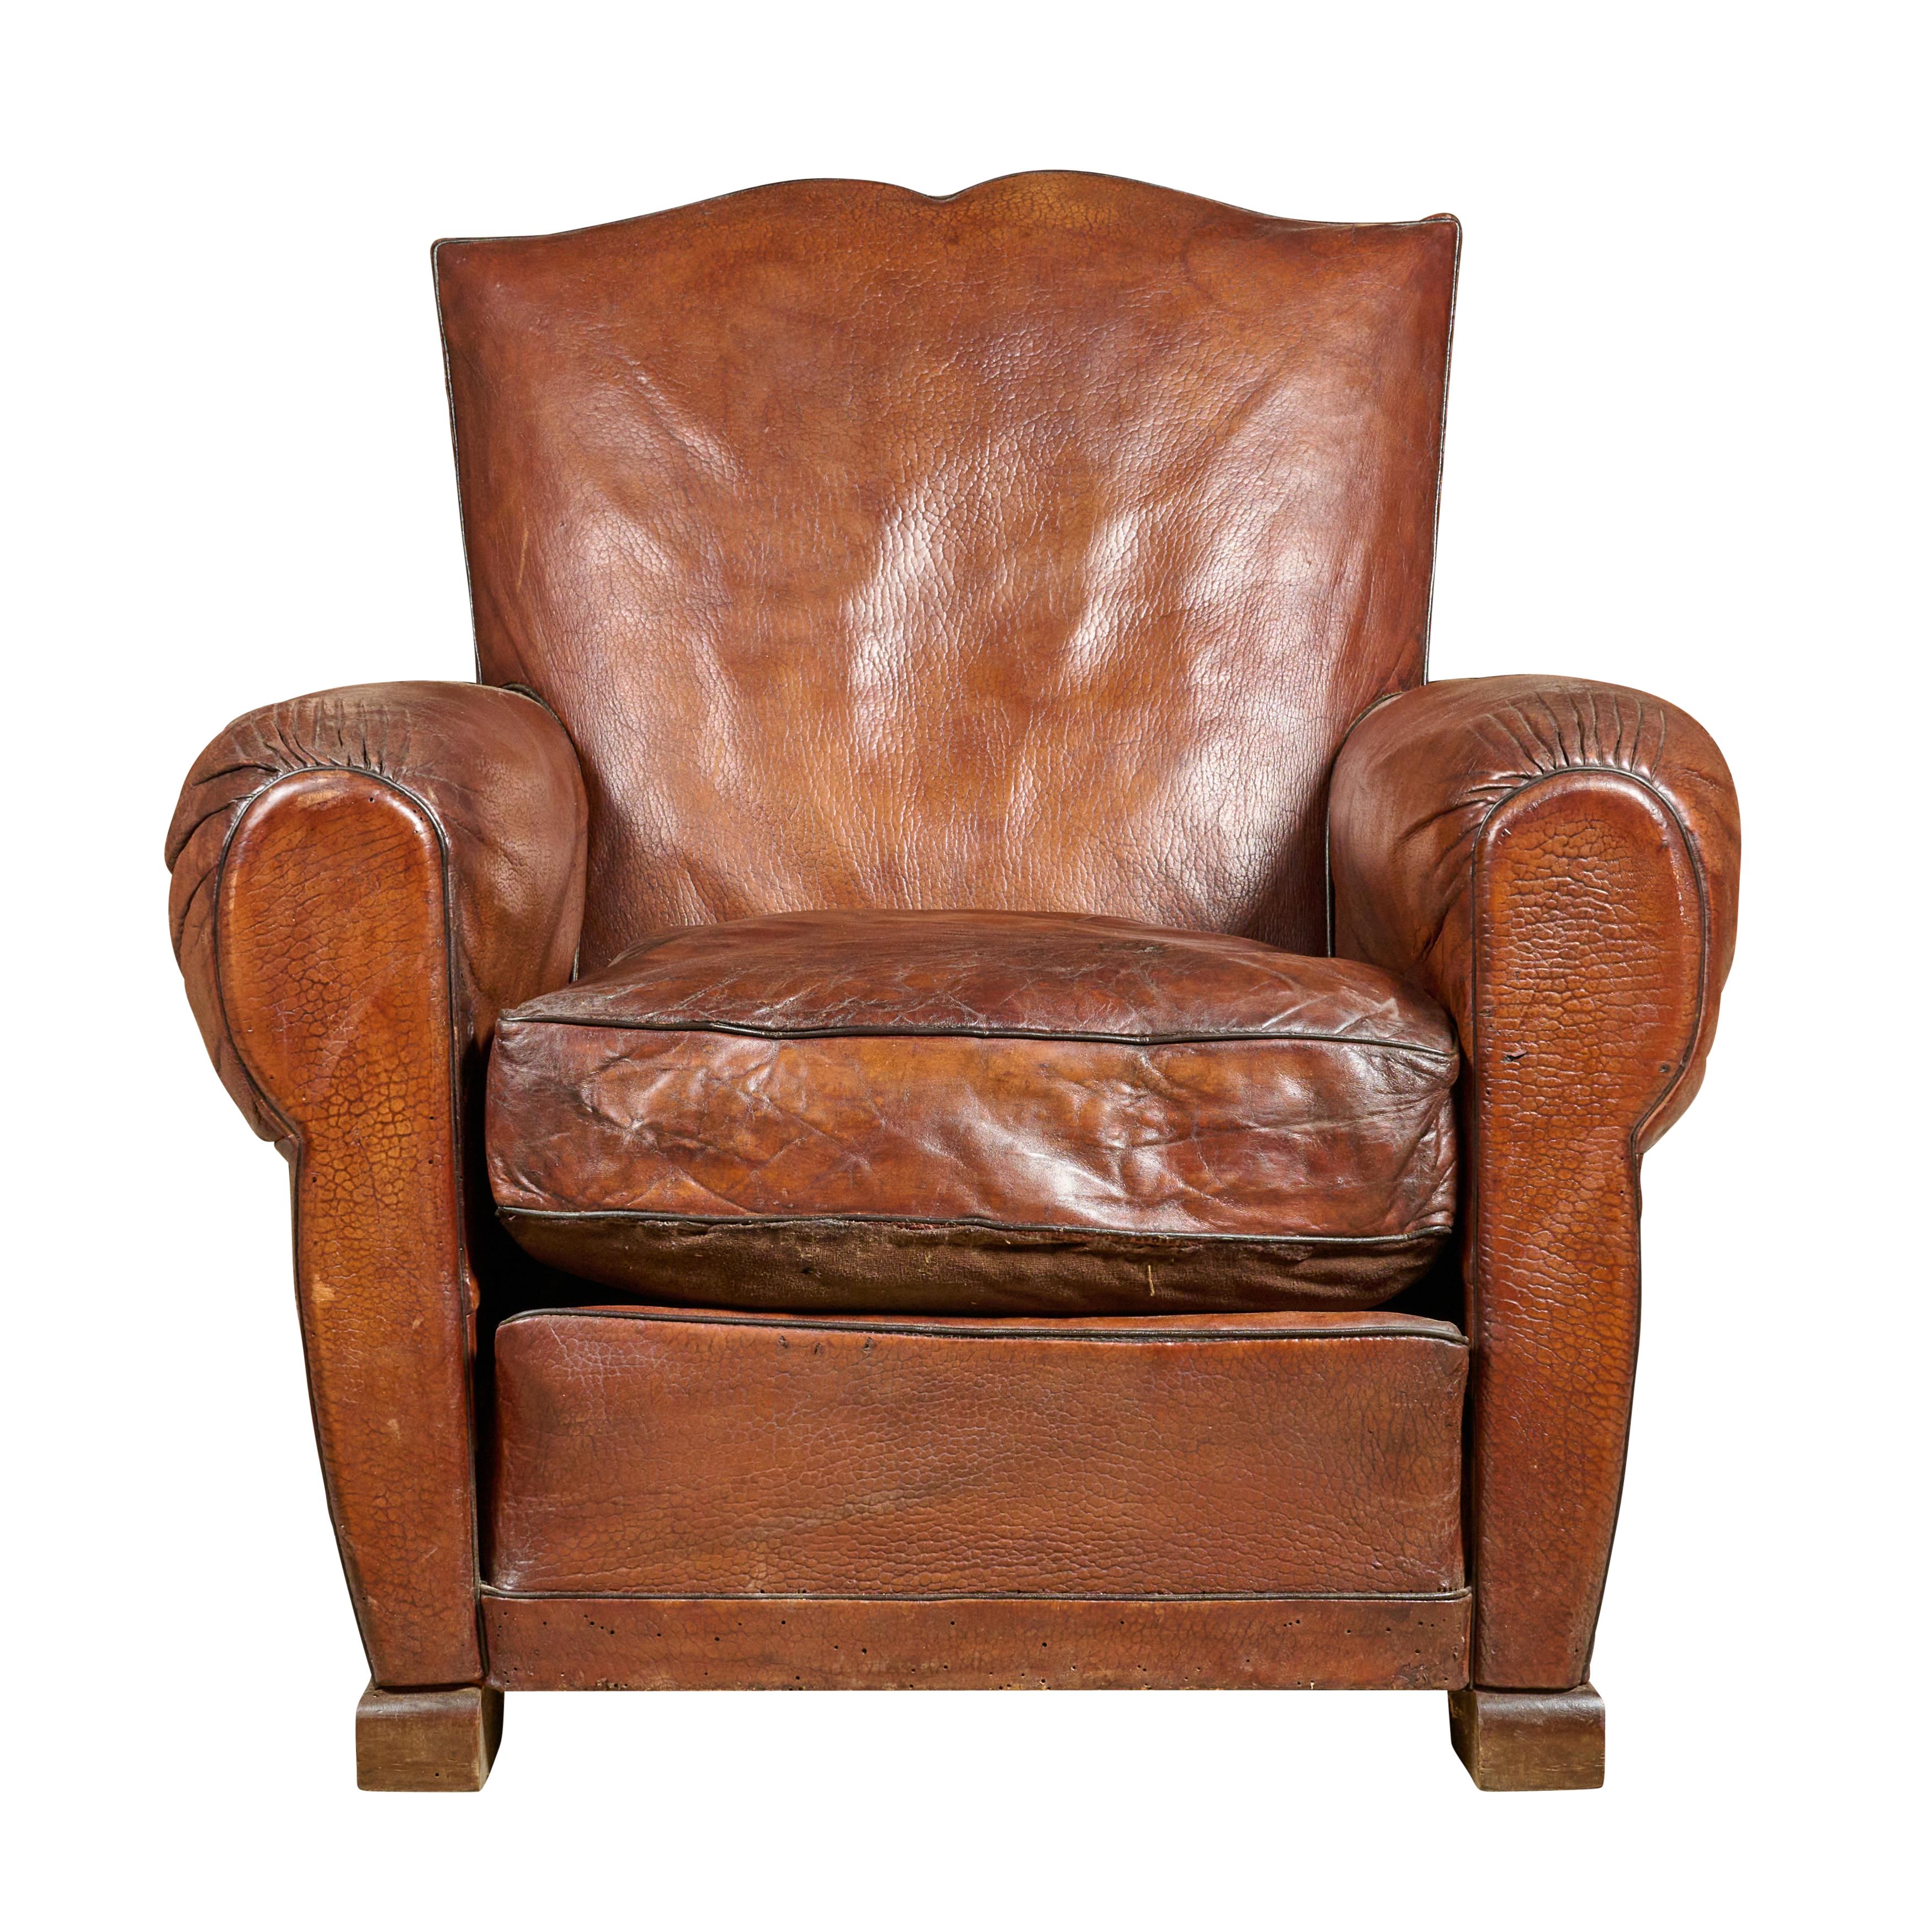 Leather club chair. Great design and patina.